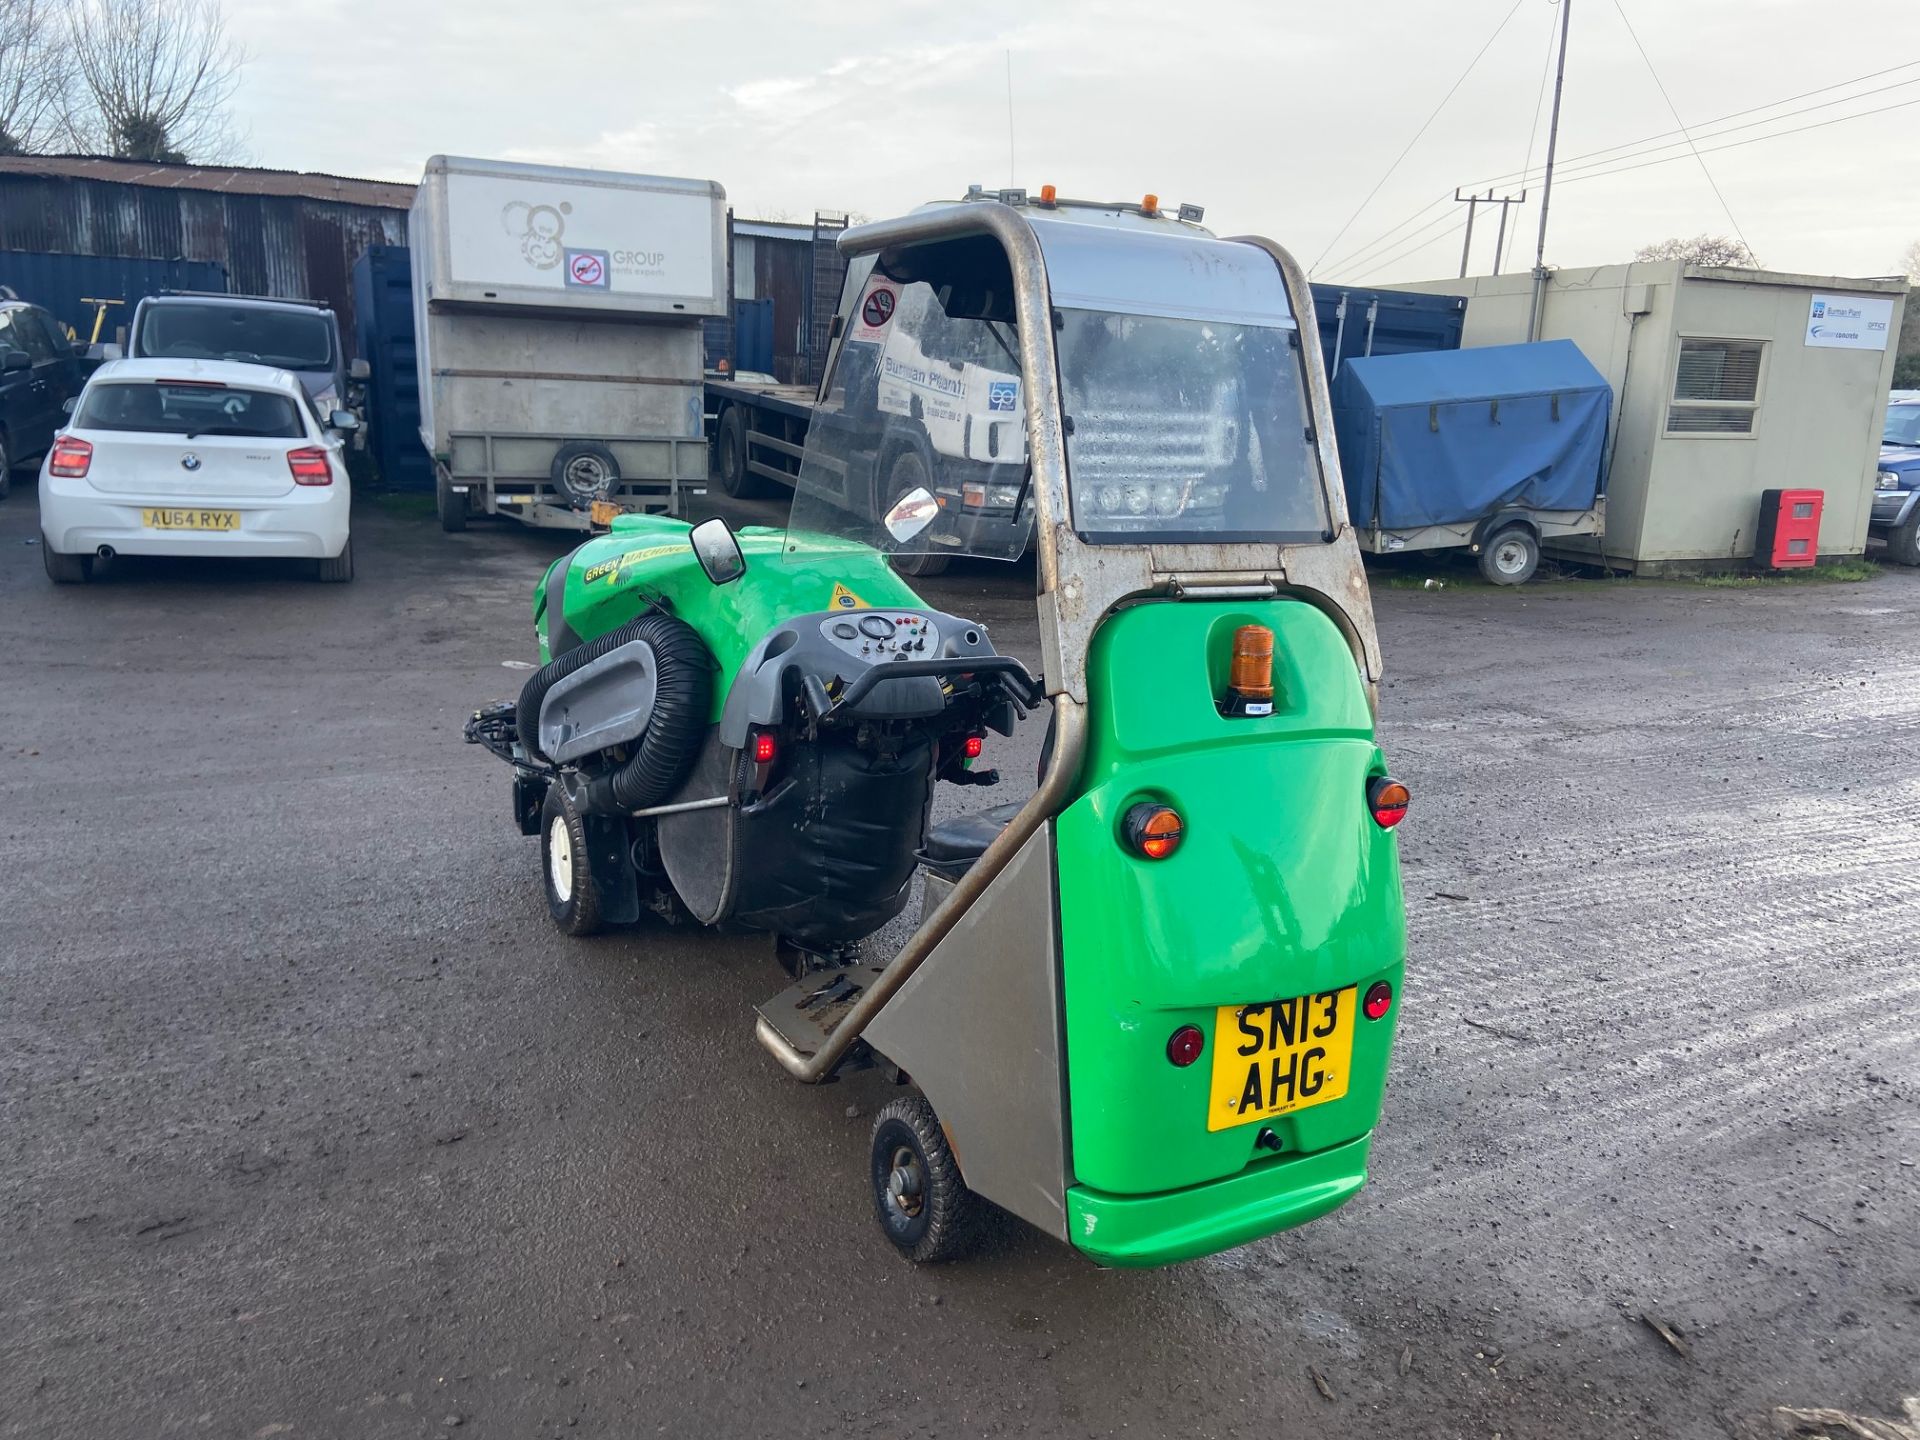 2013/13 REG TENNANT 424HD GREEN MACHINE SWEEPER, KUBOTA ENGINE, ALL EXTRAS FROM FACTORY, 644 HOURS - Image 2 of 5